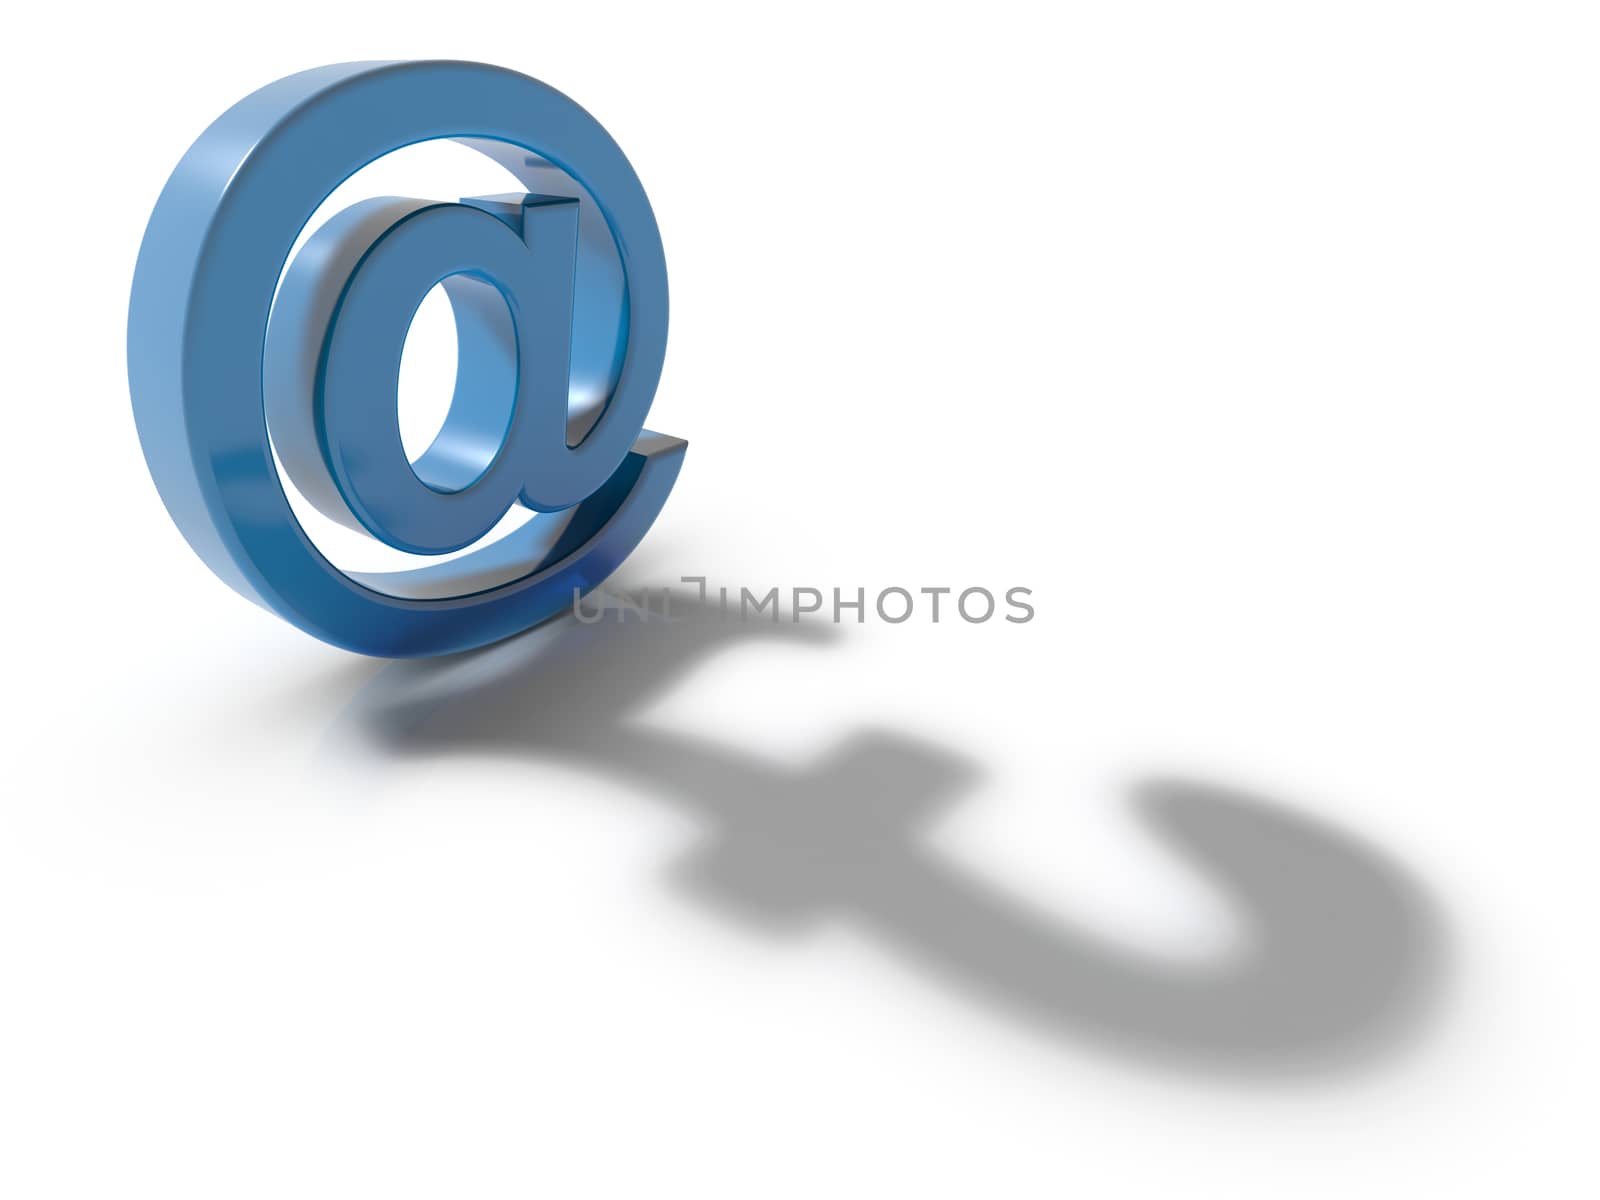 concept for E-Commerce of a email address symbol and a british pound symbol combined